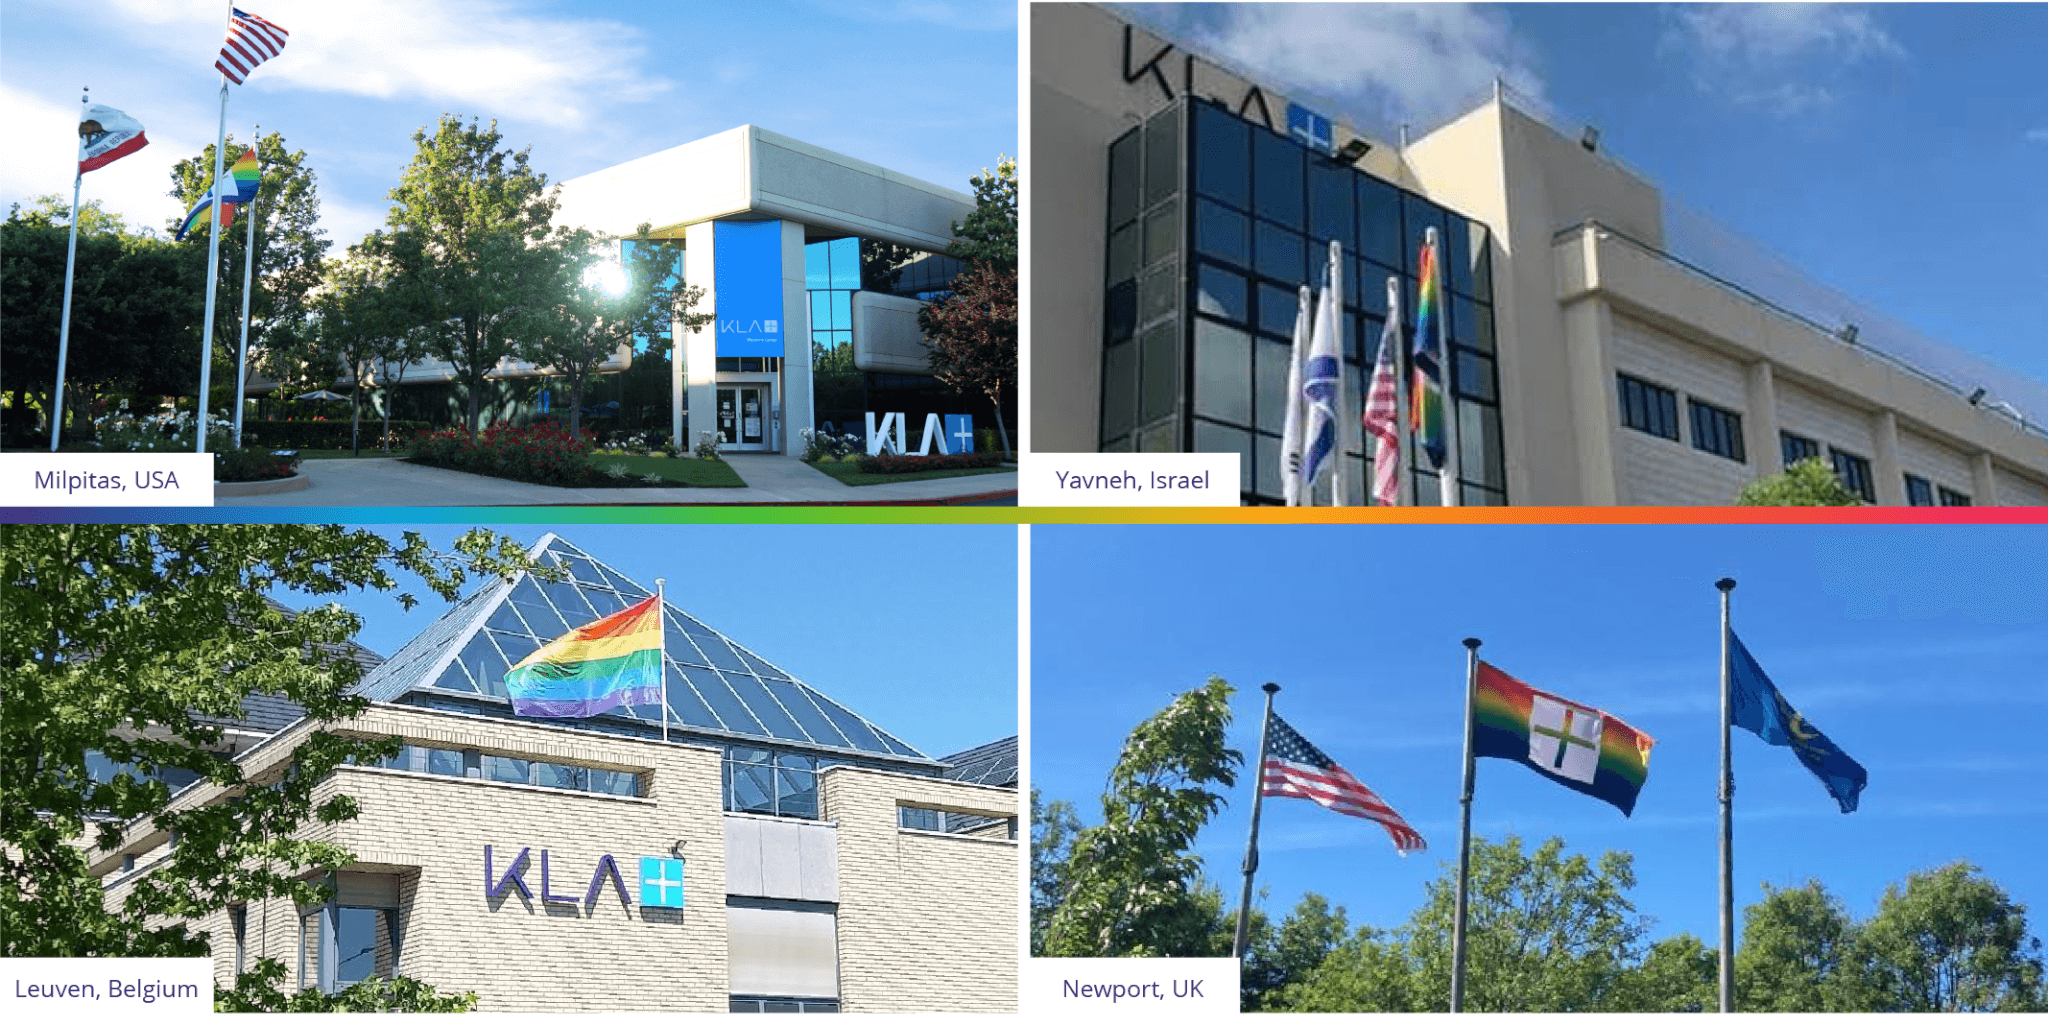 An image of the pride flag flying at several KLA offices around the world